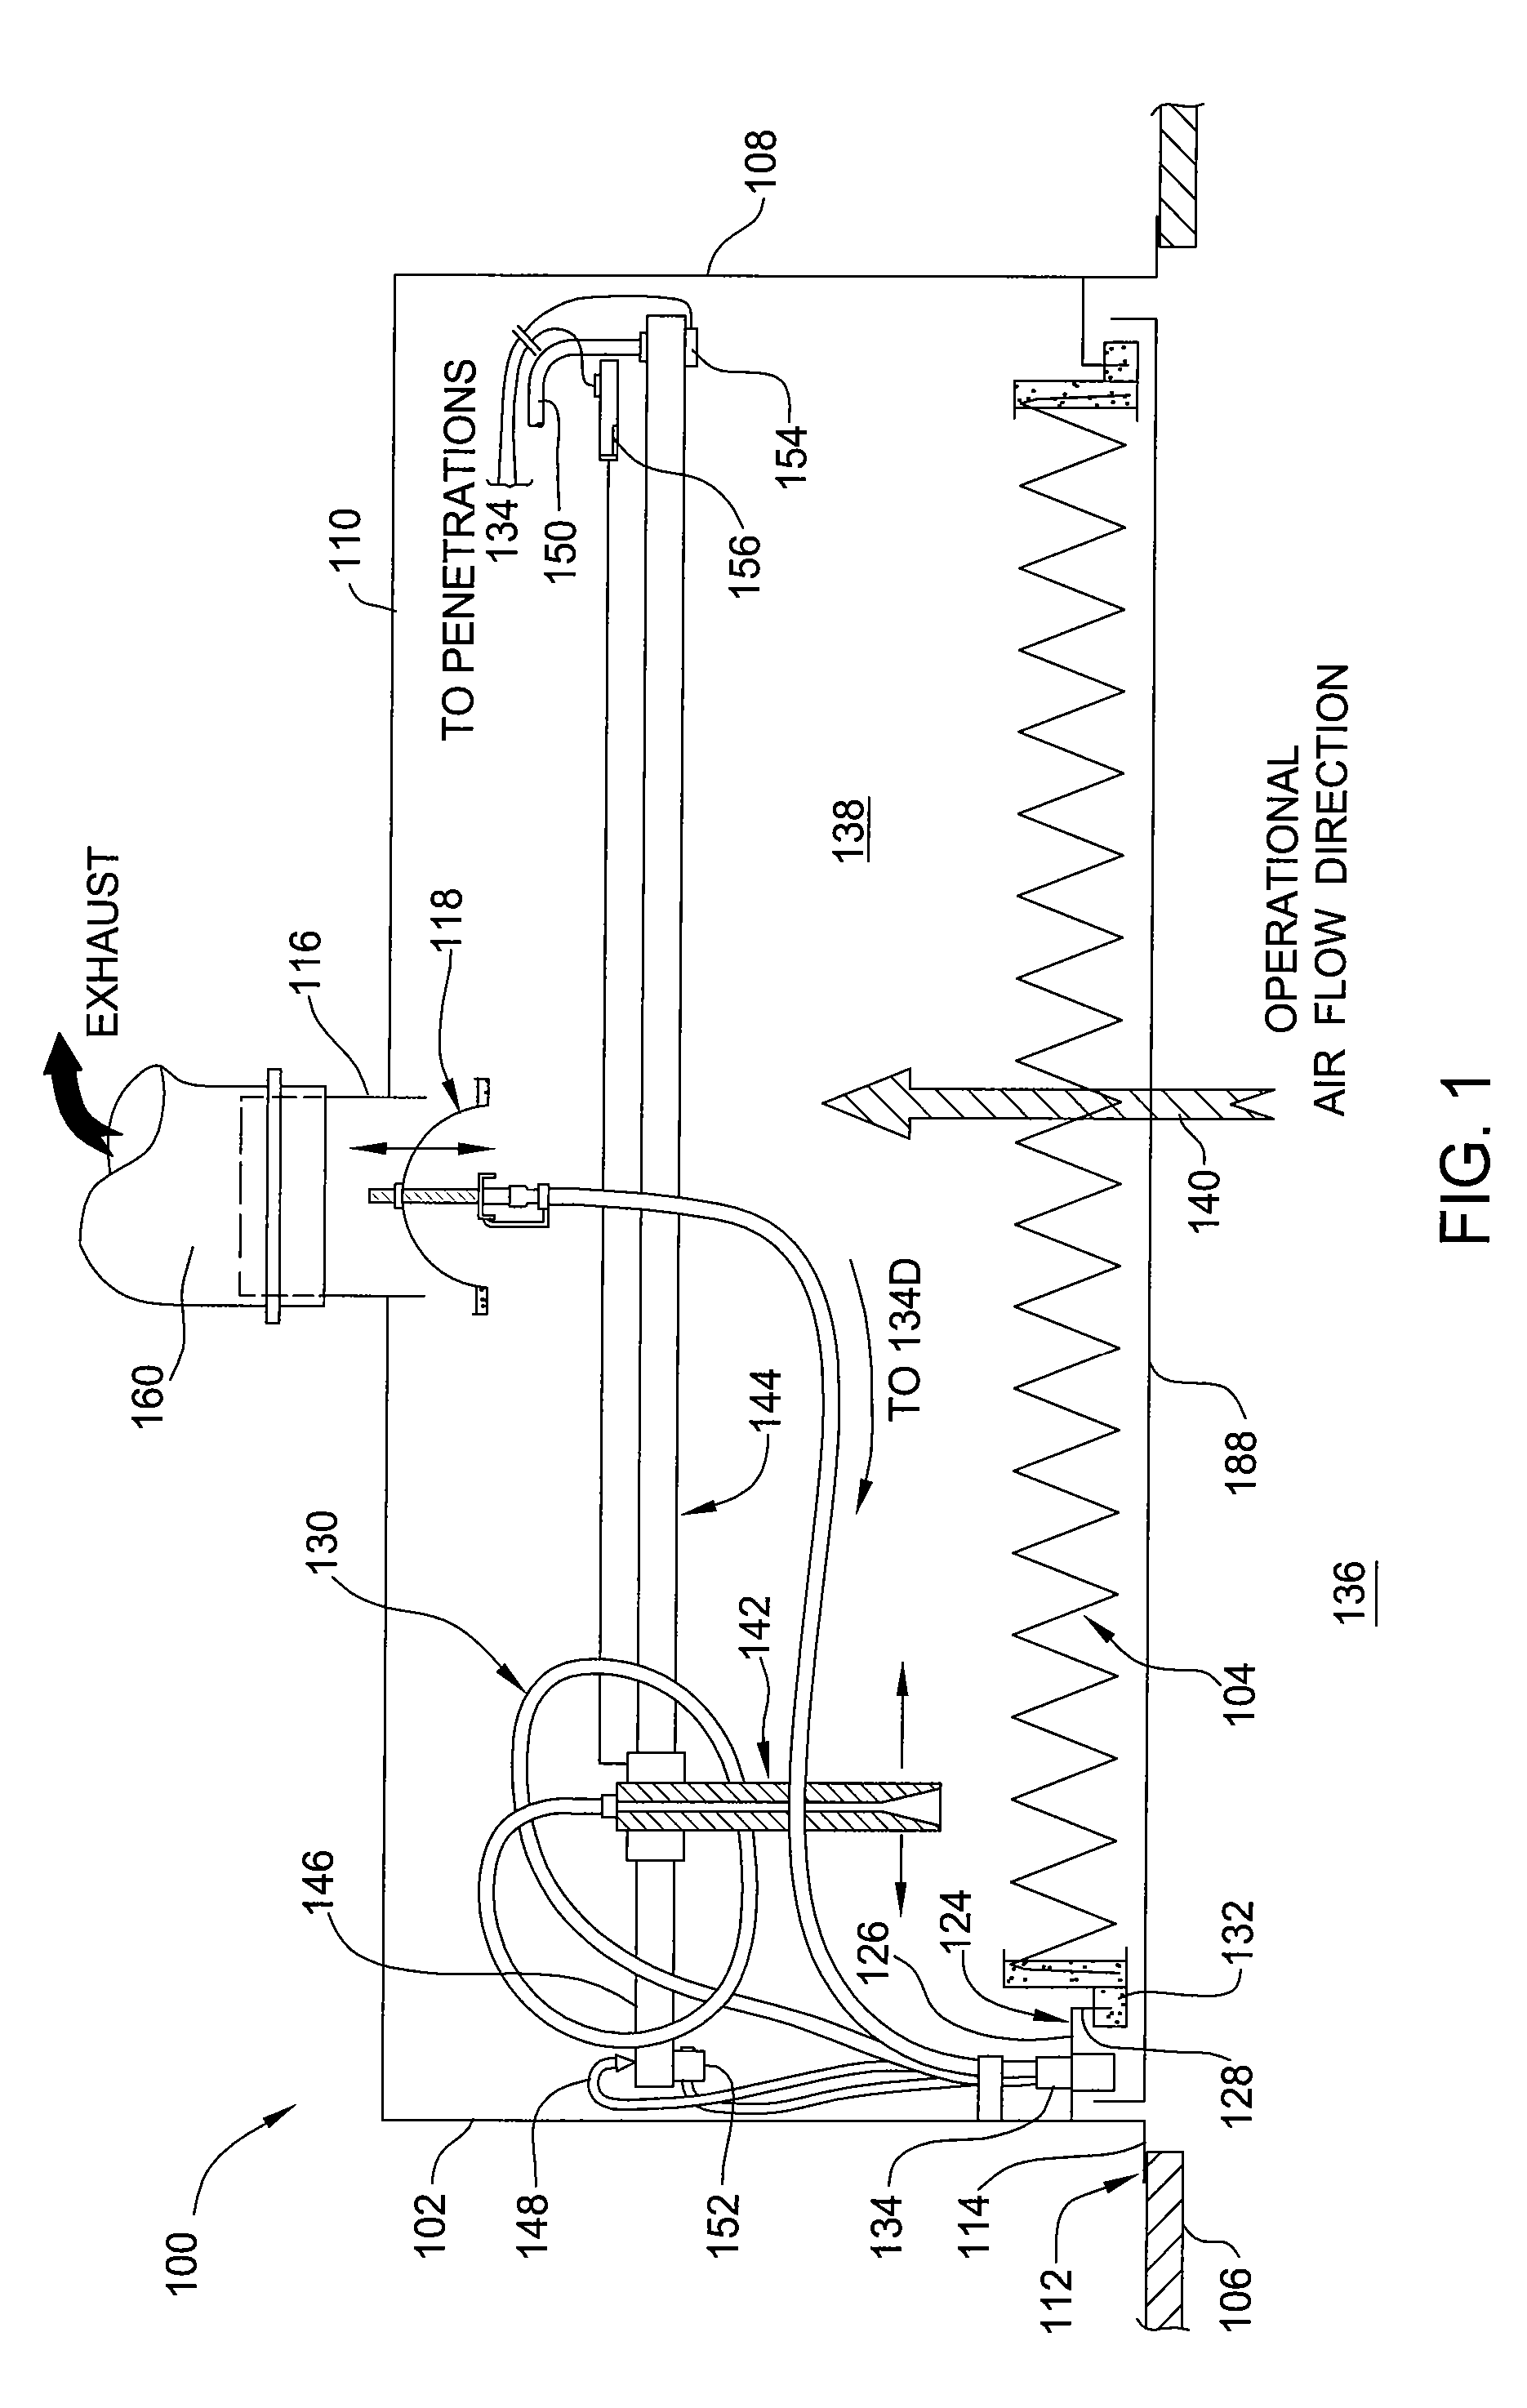 Exhaust filter module with mechanically positionable scan probe